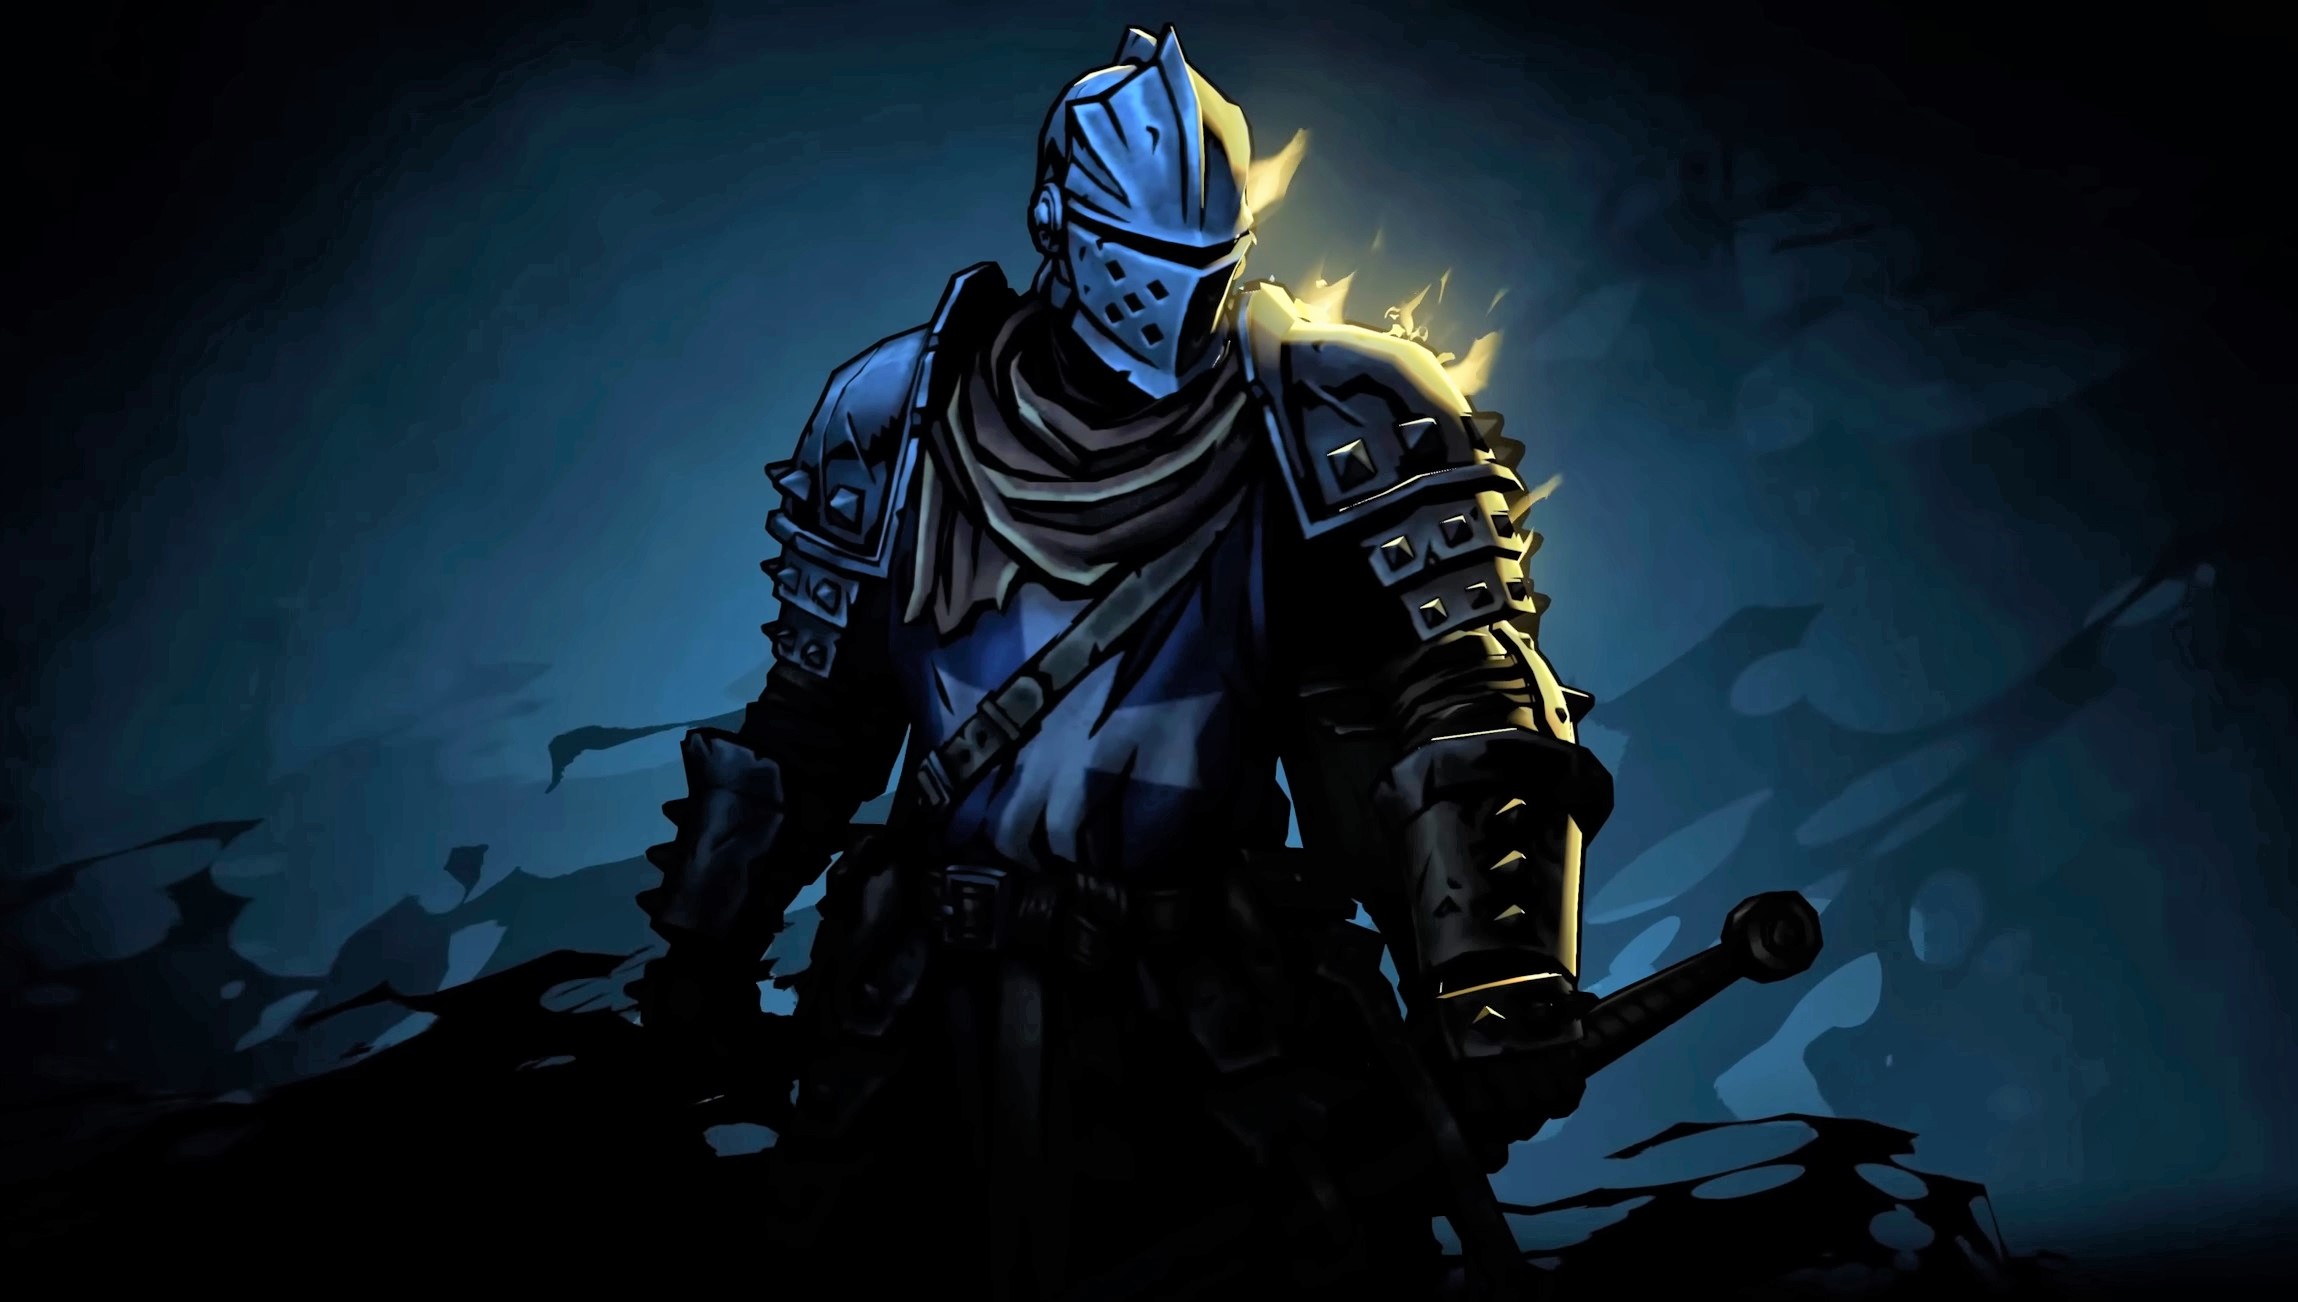 Darkest Dungeon 2’s first DLC is finally bringing back one of the original’s strongest heroes